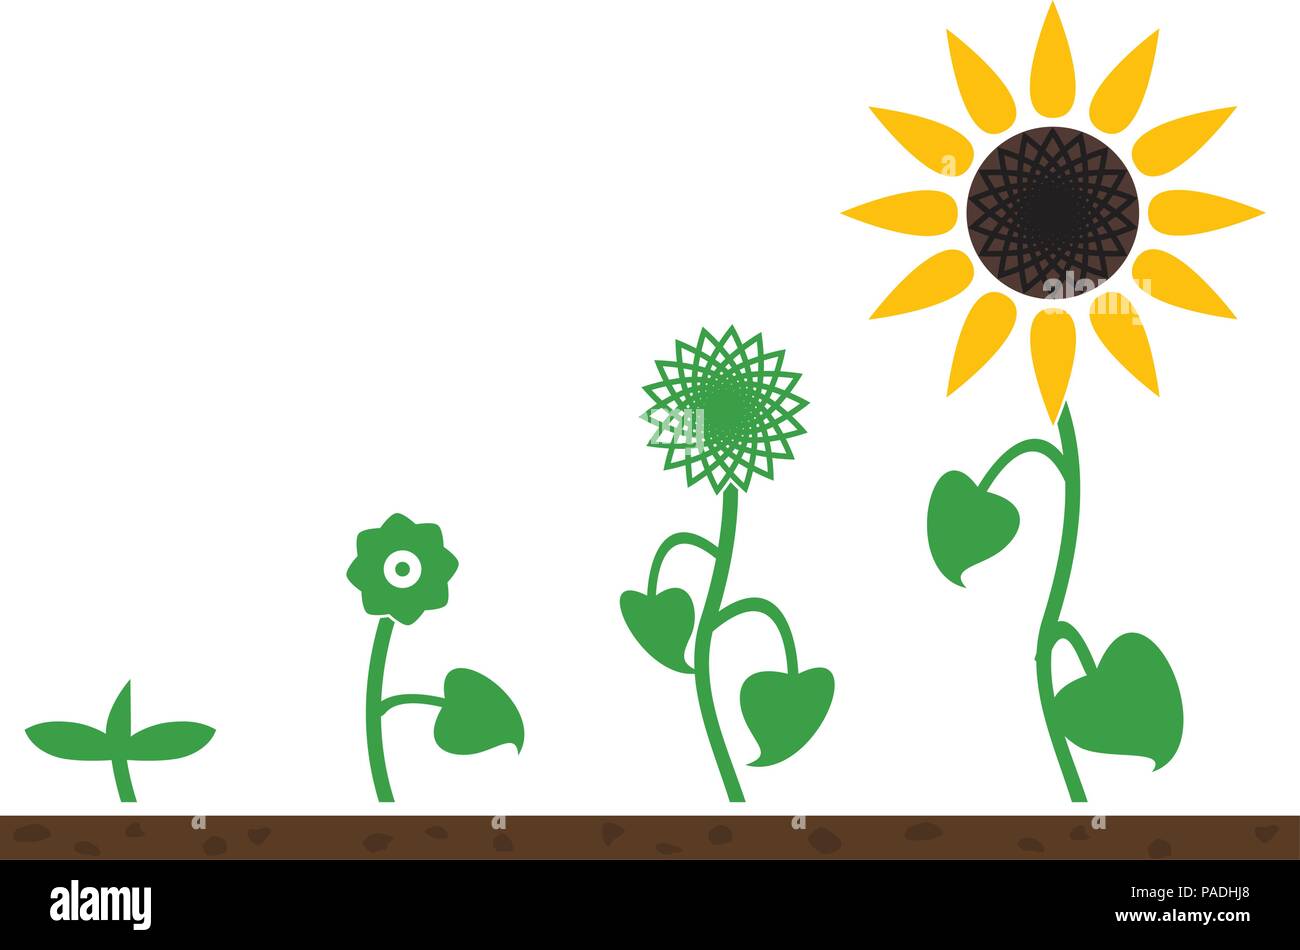 vector sunflower plant growth stages Stock Vector